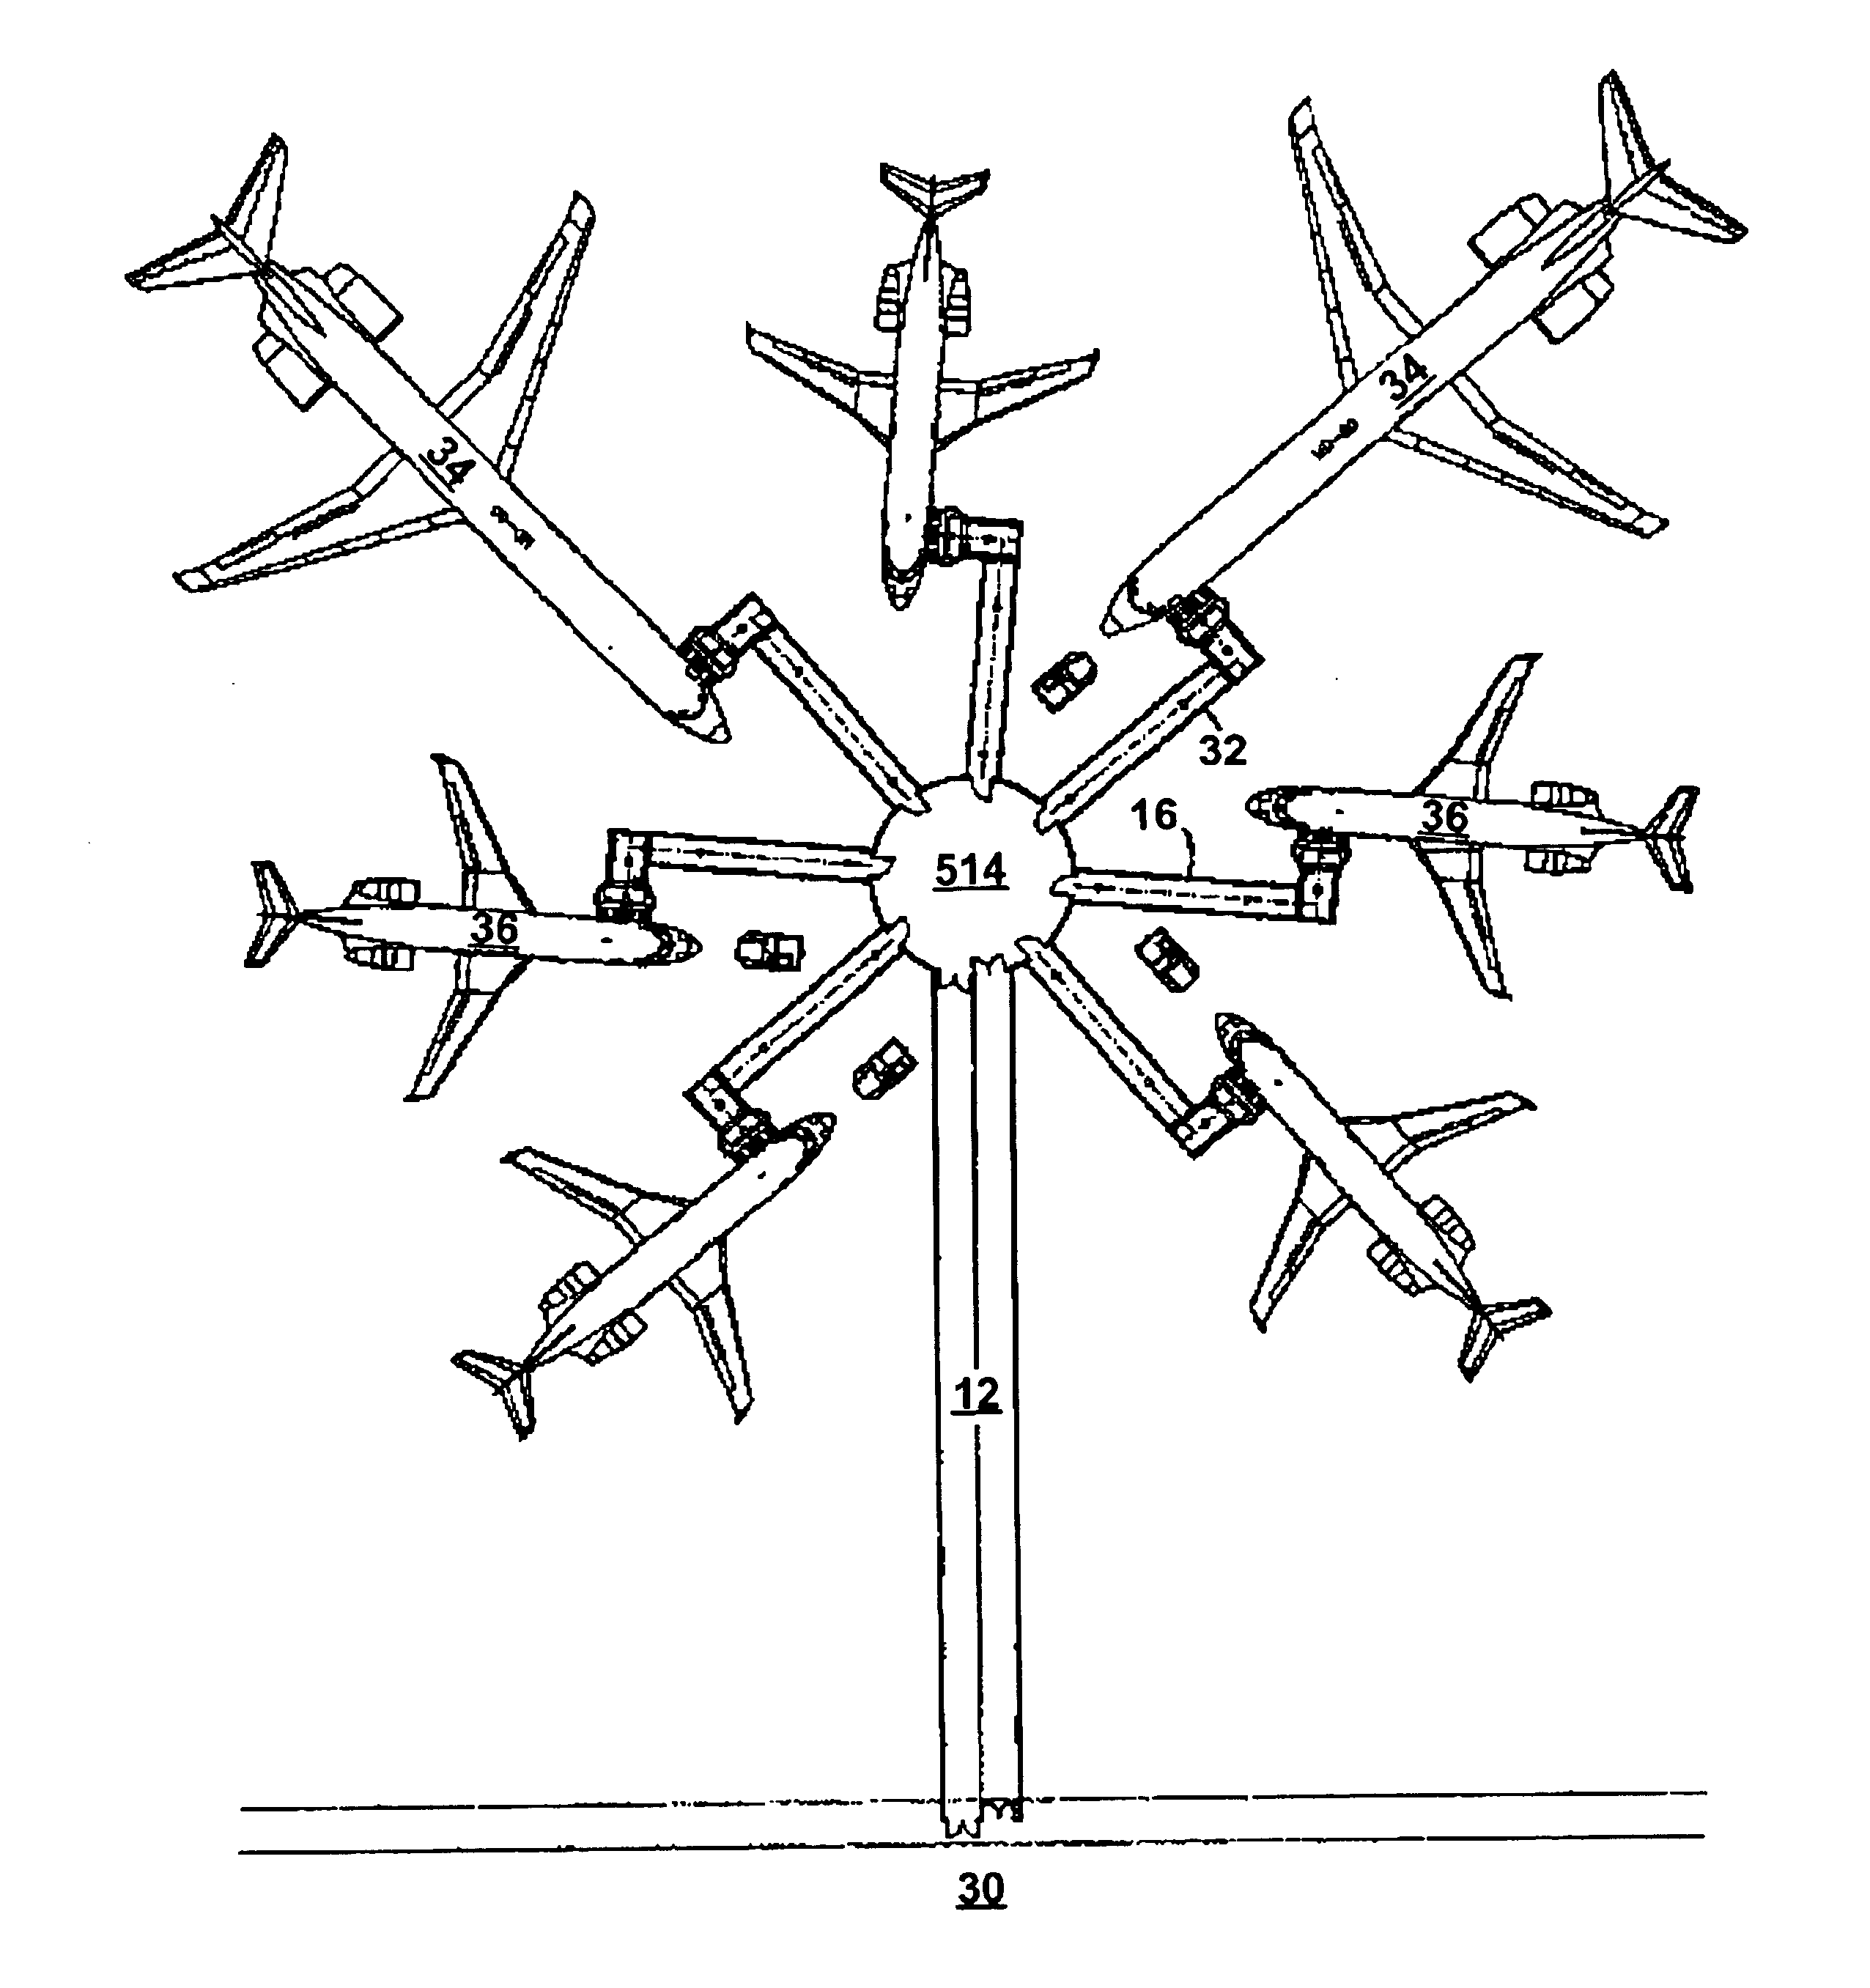 Method of boarding passengers on regional aircraft and transferring passengers between a regional aircraft and larger aircraft